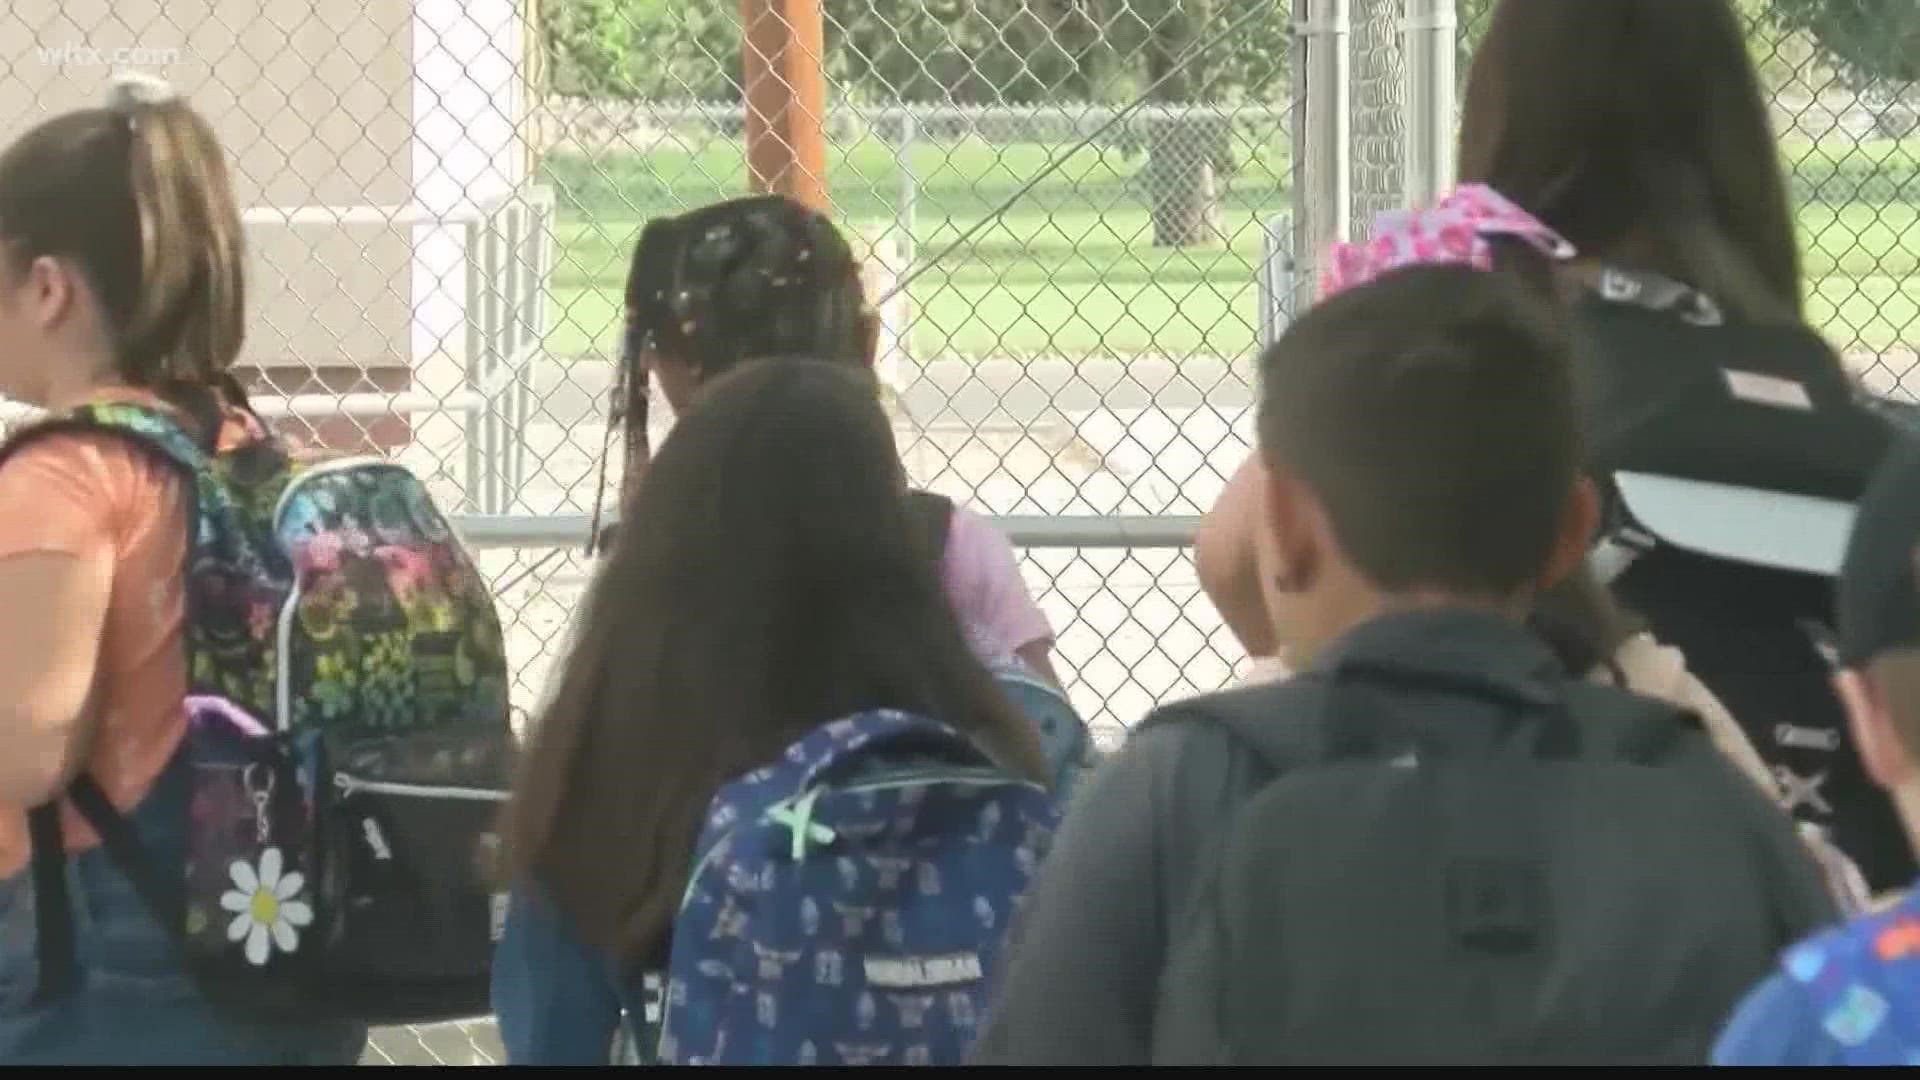 The CDC is expected to relax its COVID-19 recommendations in the coming days, starting with schools, just as students head back to the classroom.